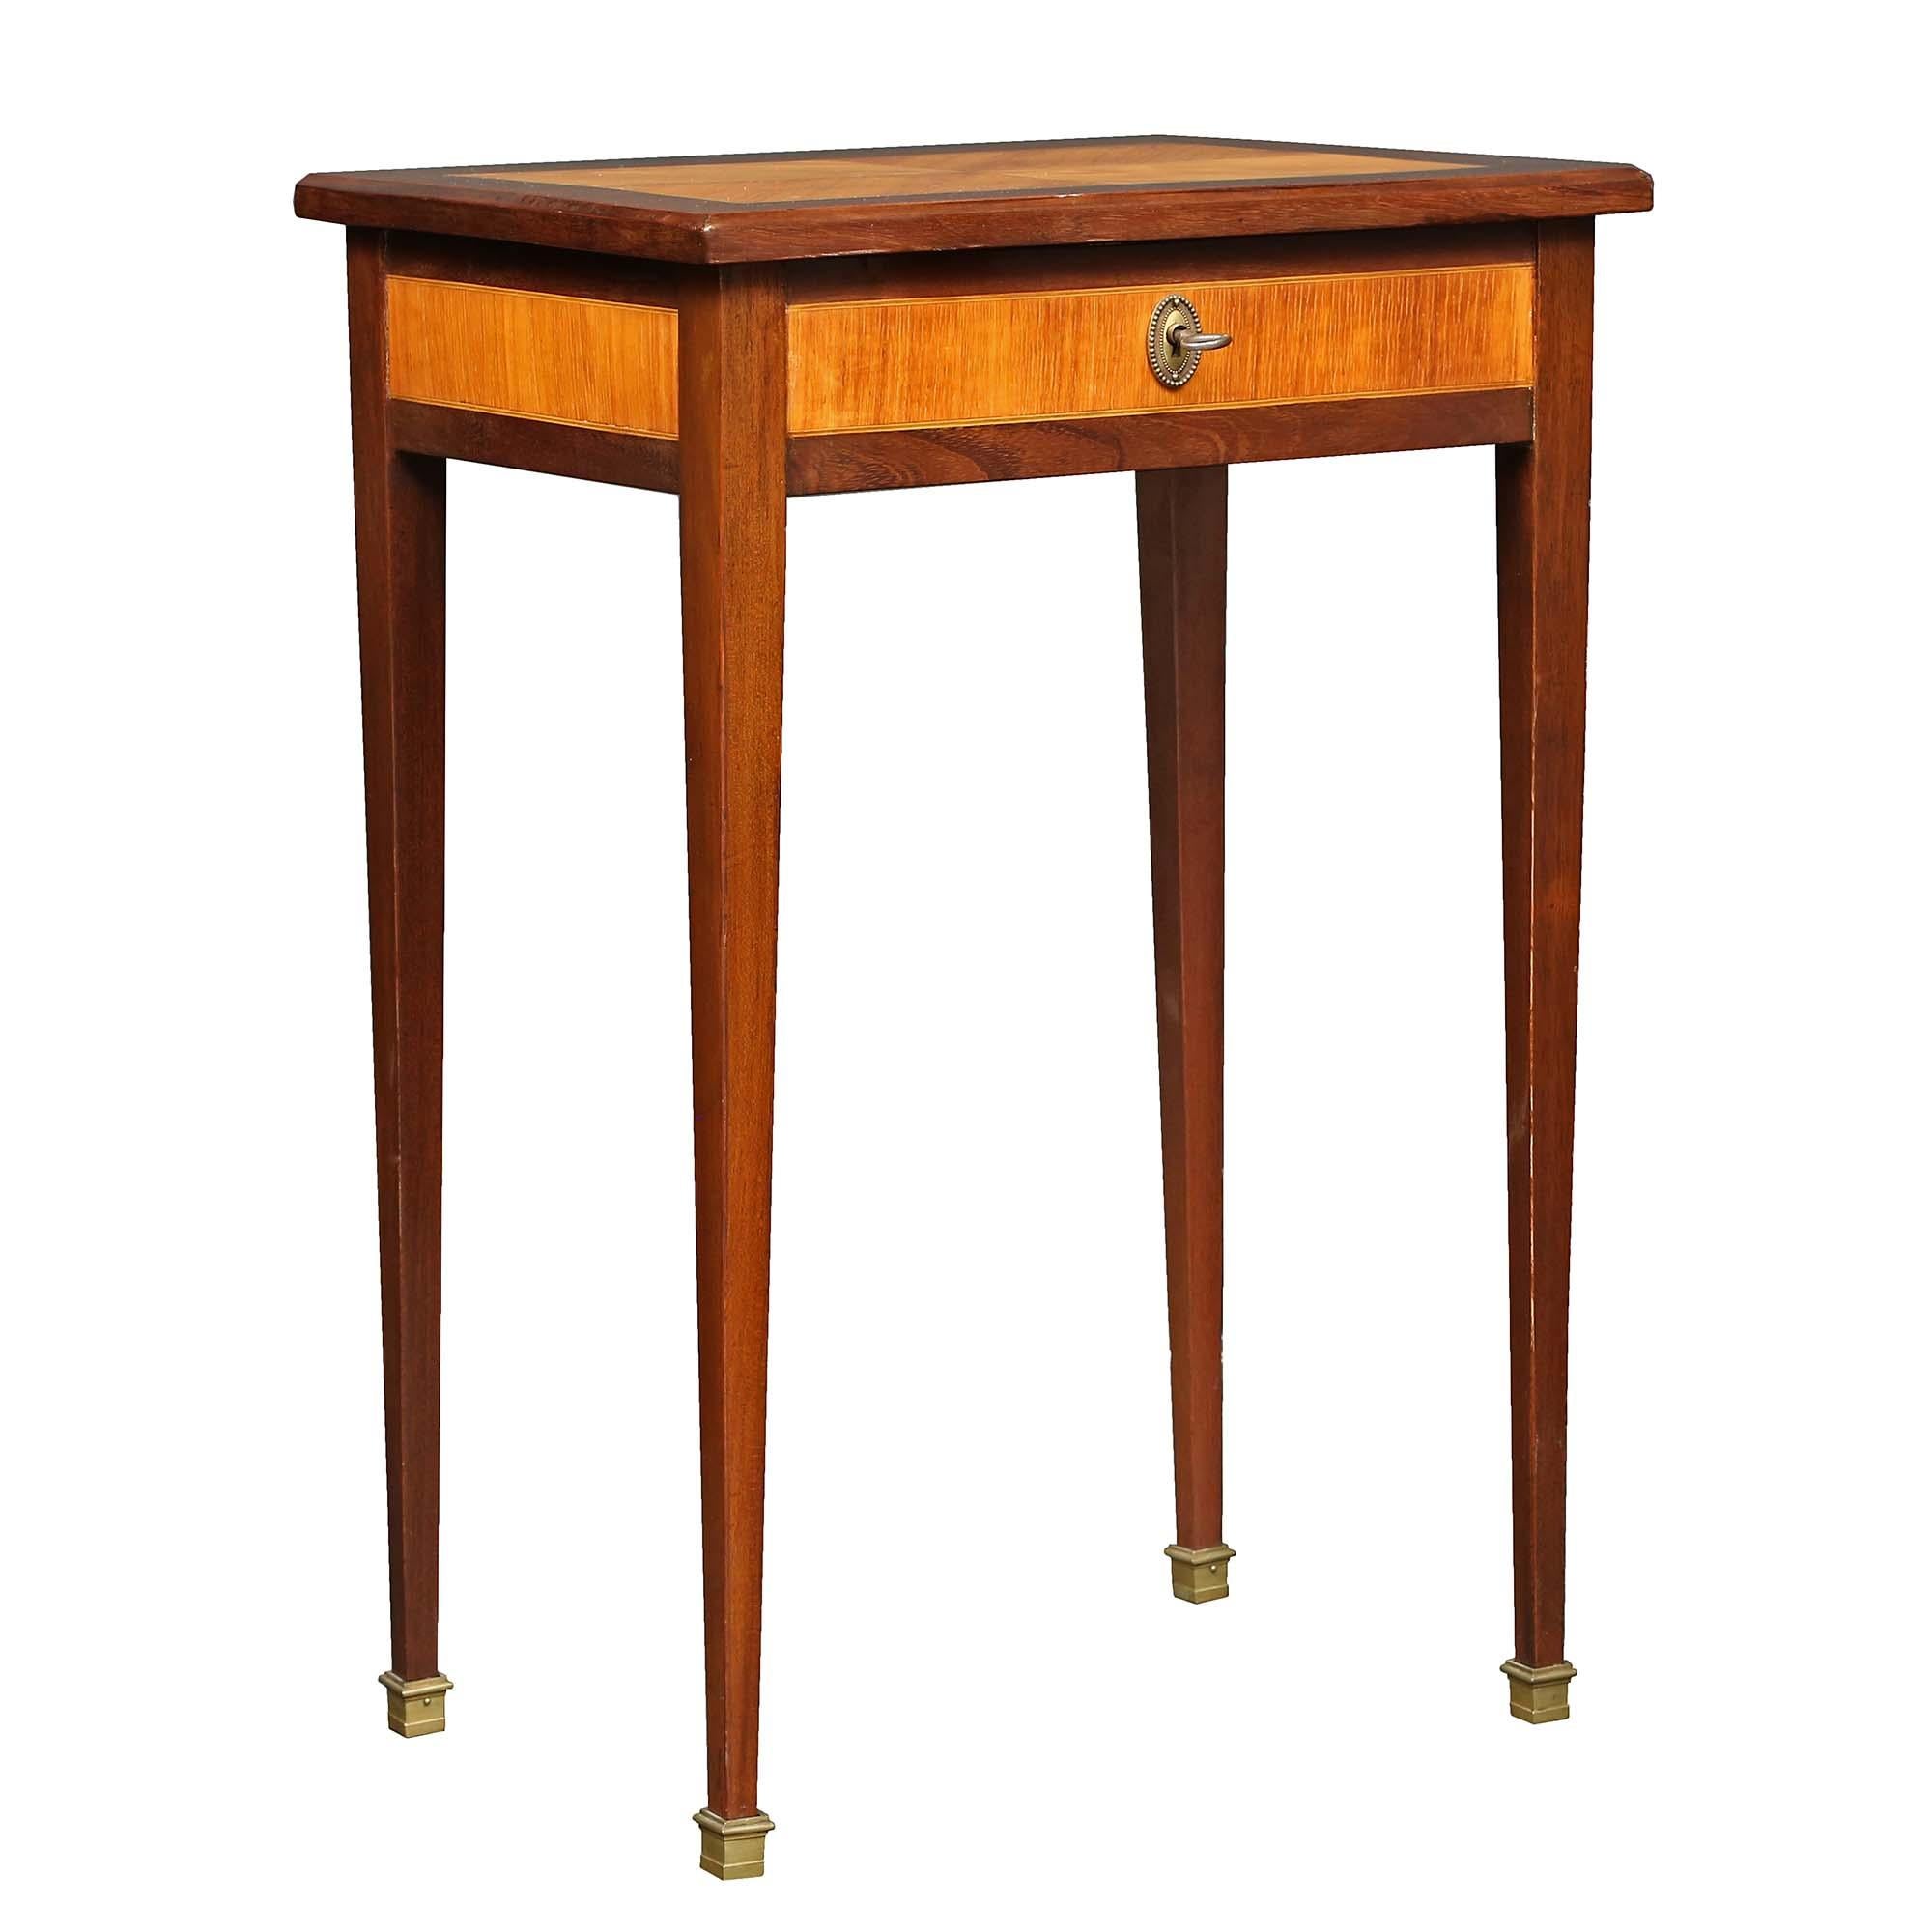 A charming French 19th century Louis XVI st. tulipwood, charmwood and kingwood side/vanity table. The table raised on straight legs has a quarter veneered tulip wood top bordered by charm wood and ormolu sabots. The top lifts up to a divided